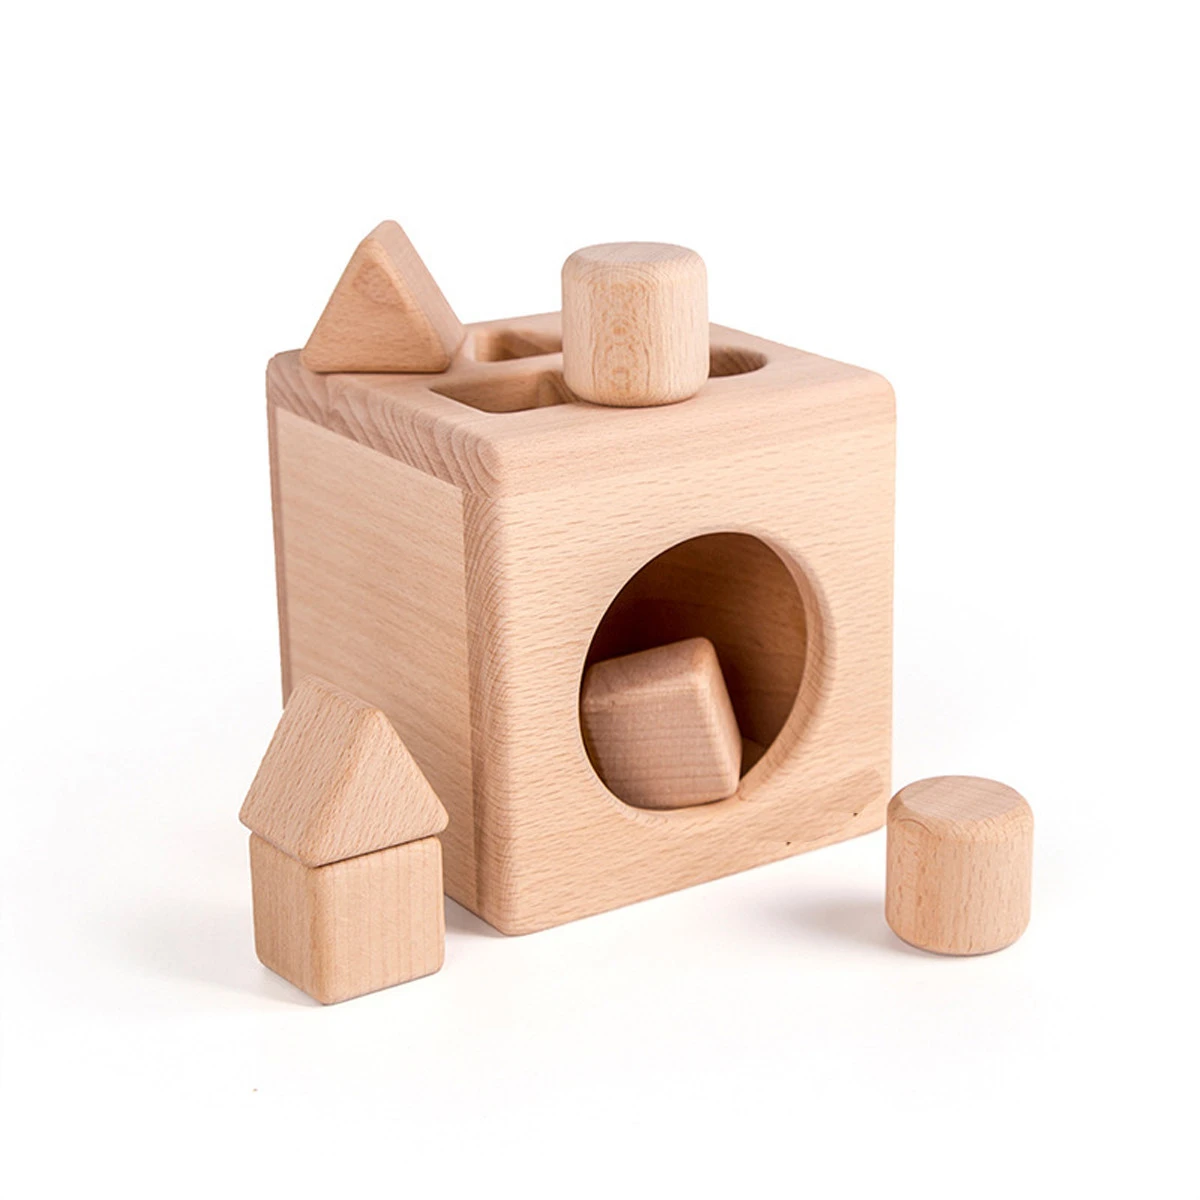 2021 Chinese Natural wooden toys shape block educational match wood box toy for Infant learing and training WBC003